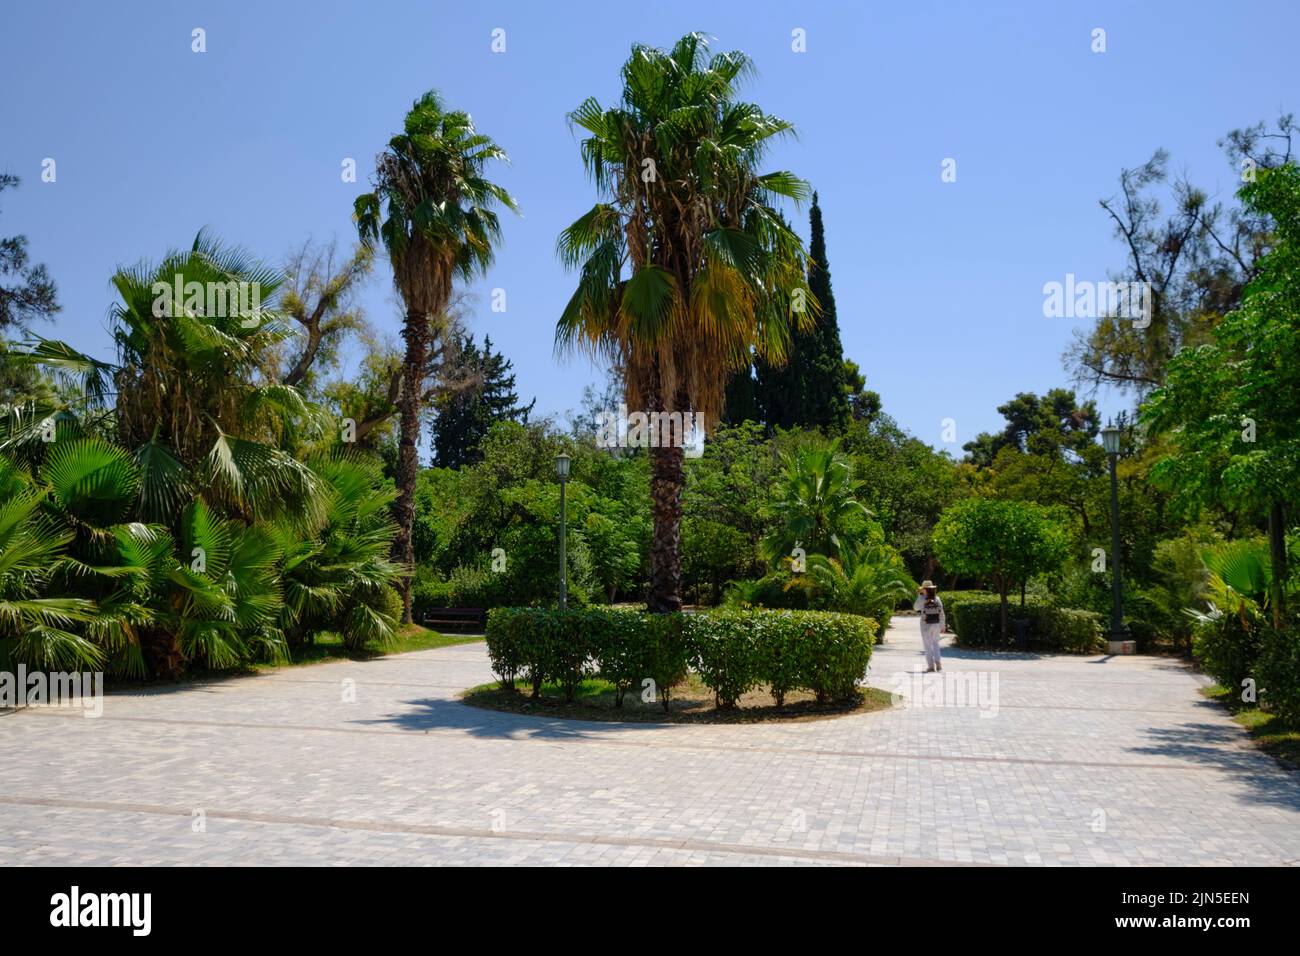 Palm trees in the middle of Pedion tou Areos park in central Athens Stock Photo